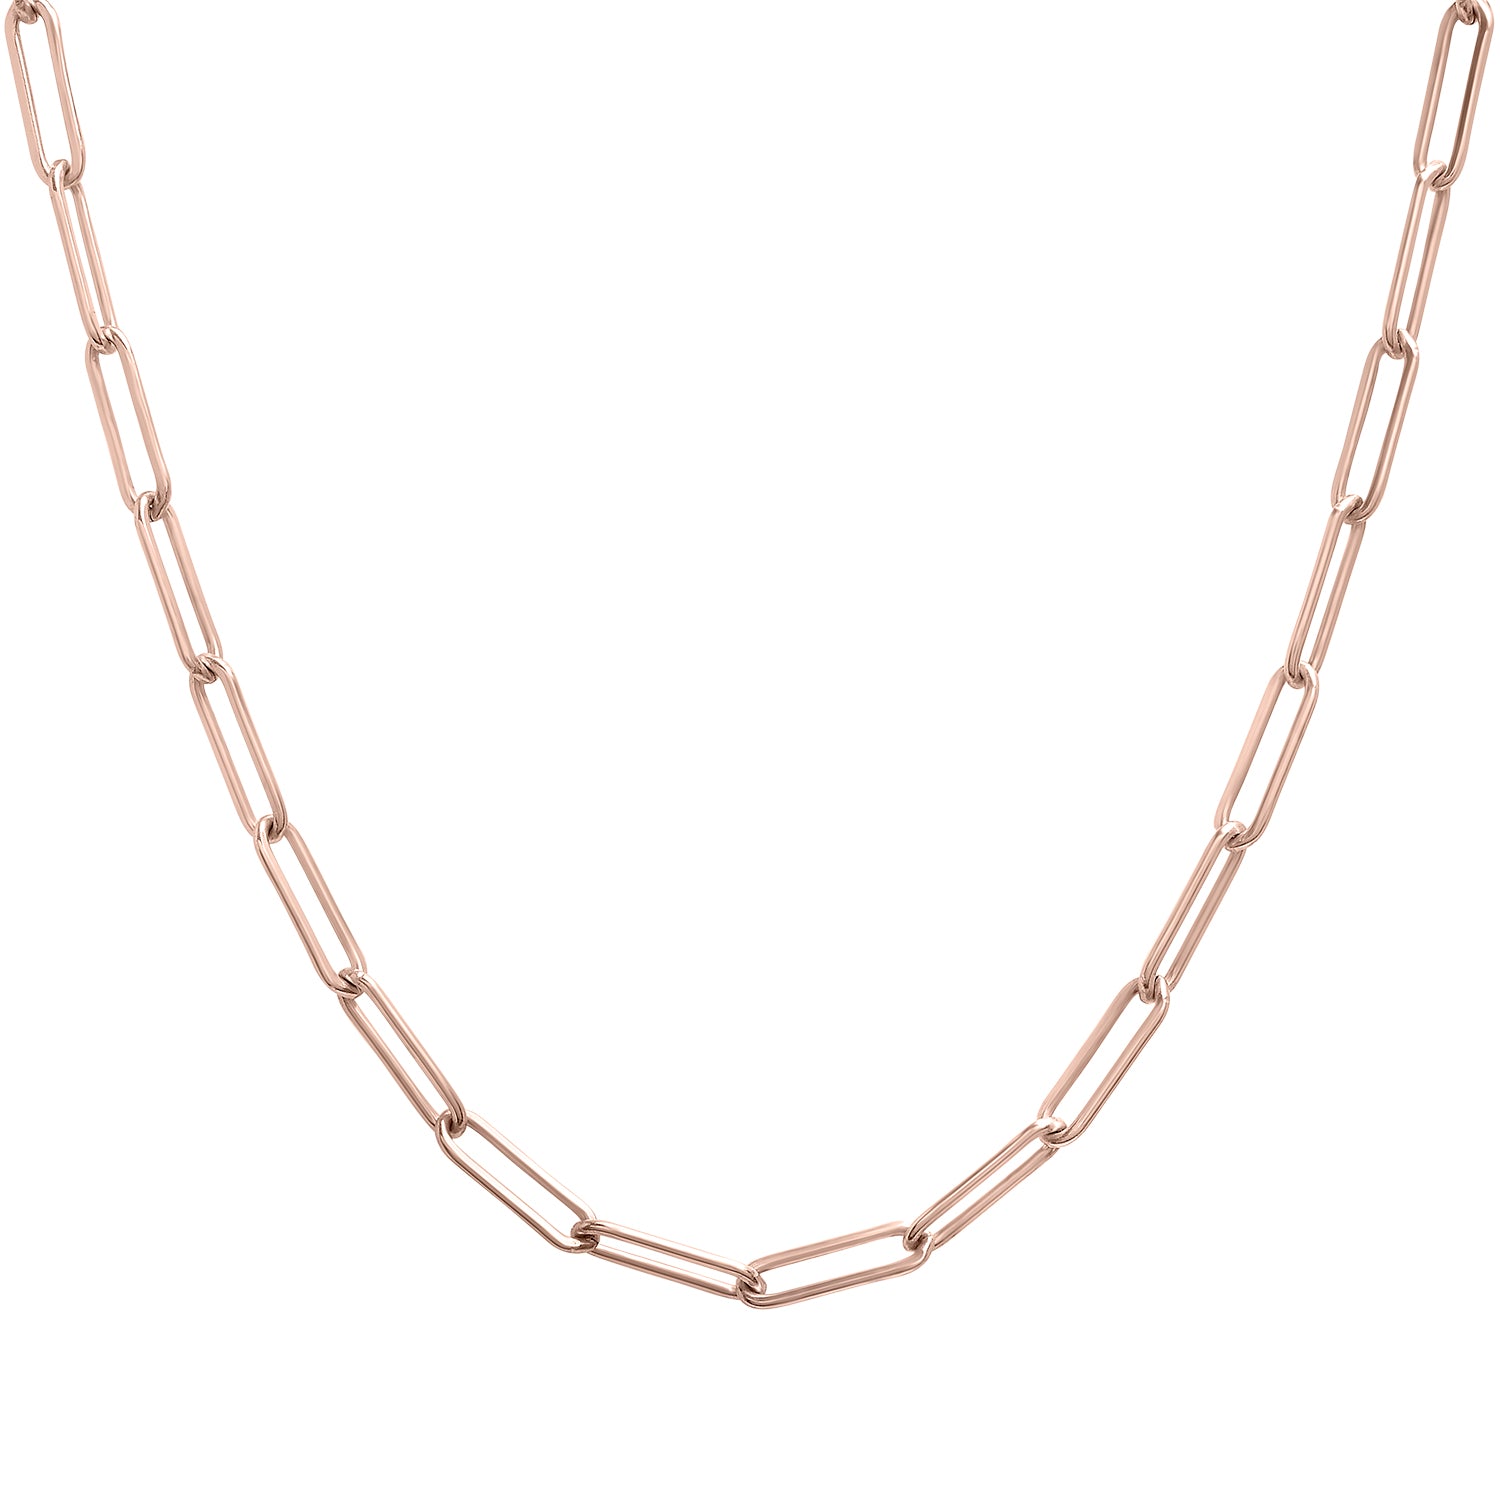 Paperclip Chain Necklace with Toggle Closure in Rose Gold